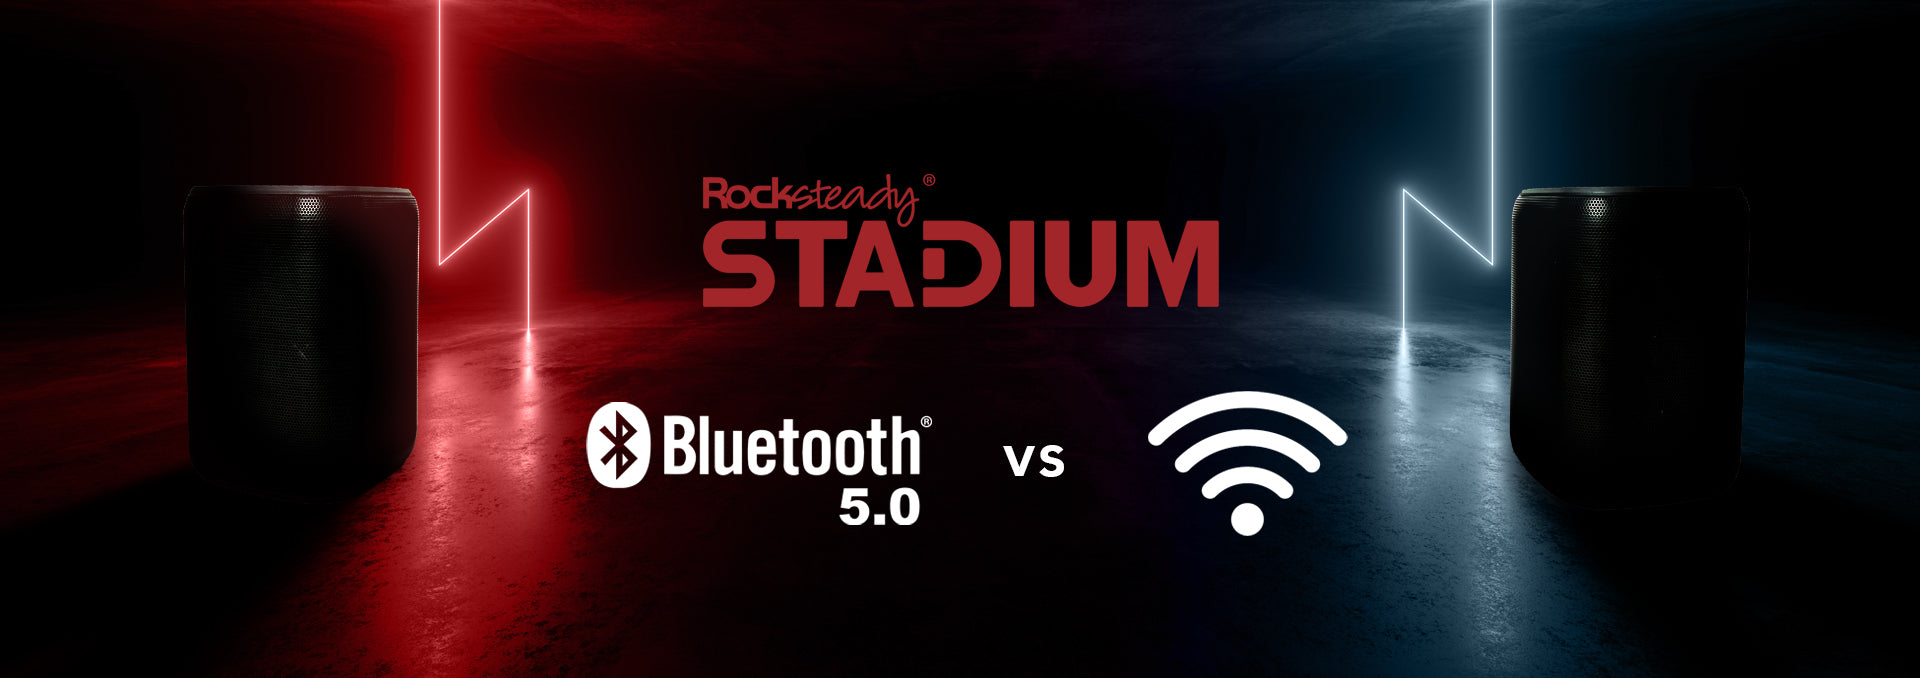 WIFI VS BLUETOOTH, WHICH IS BETTER